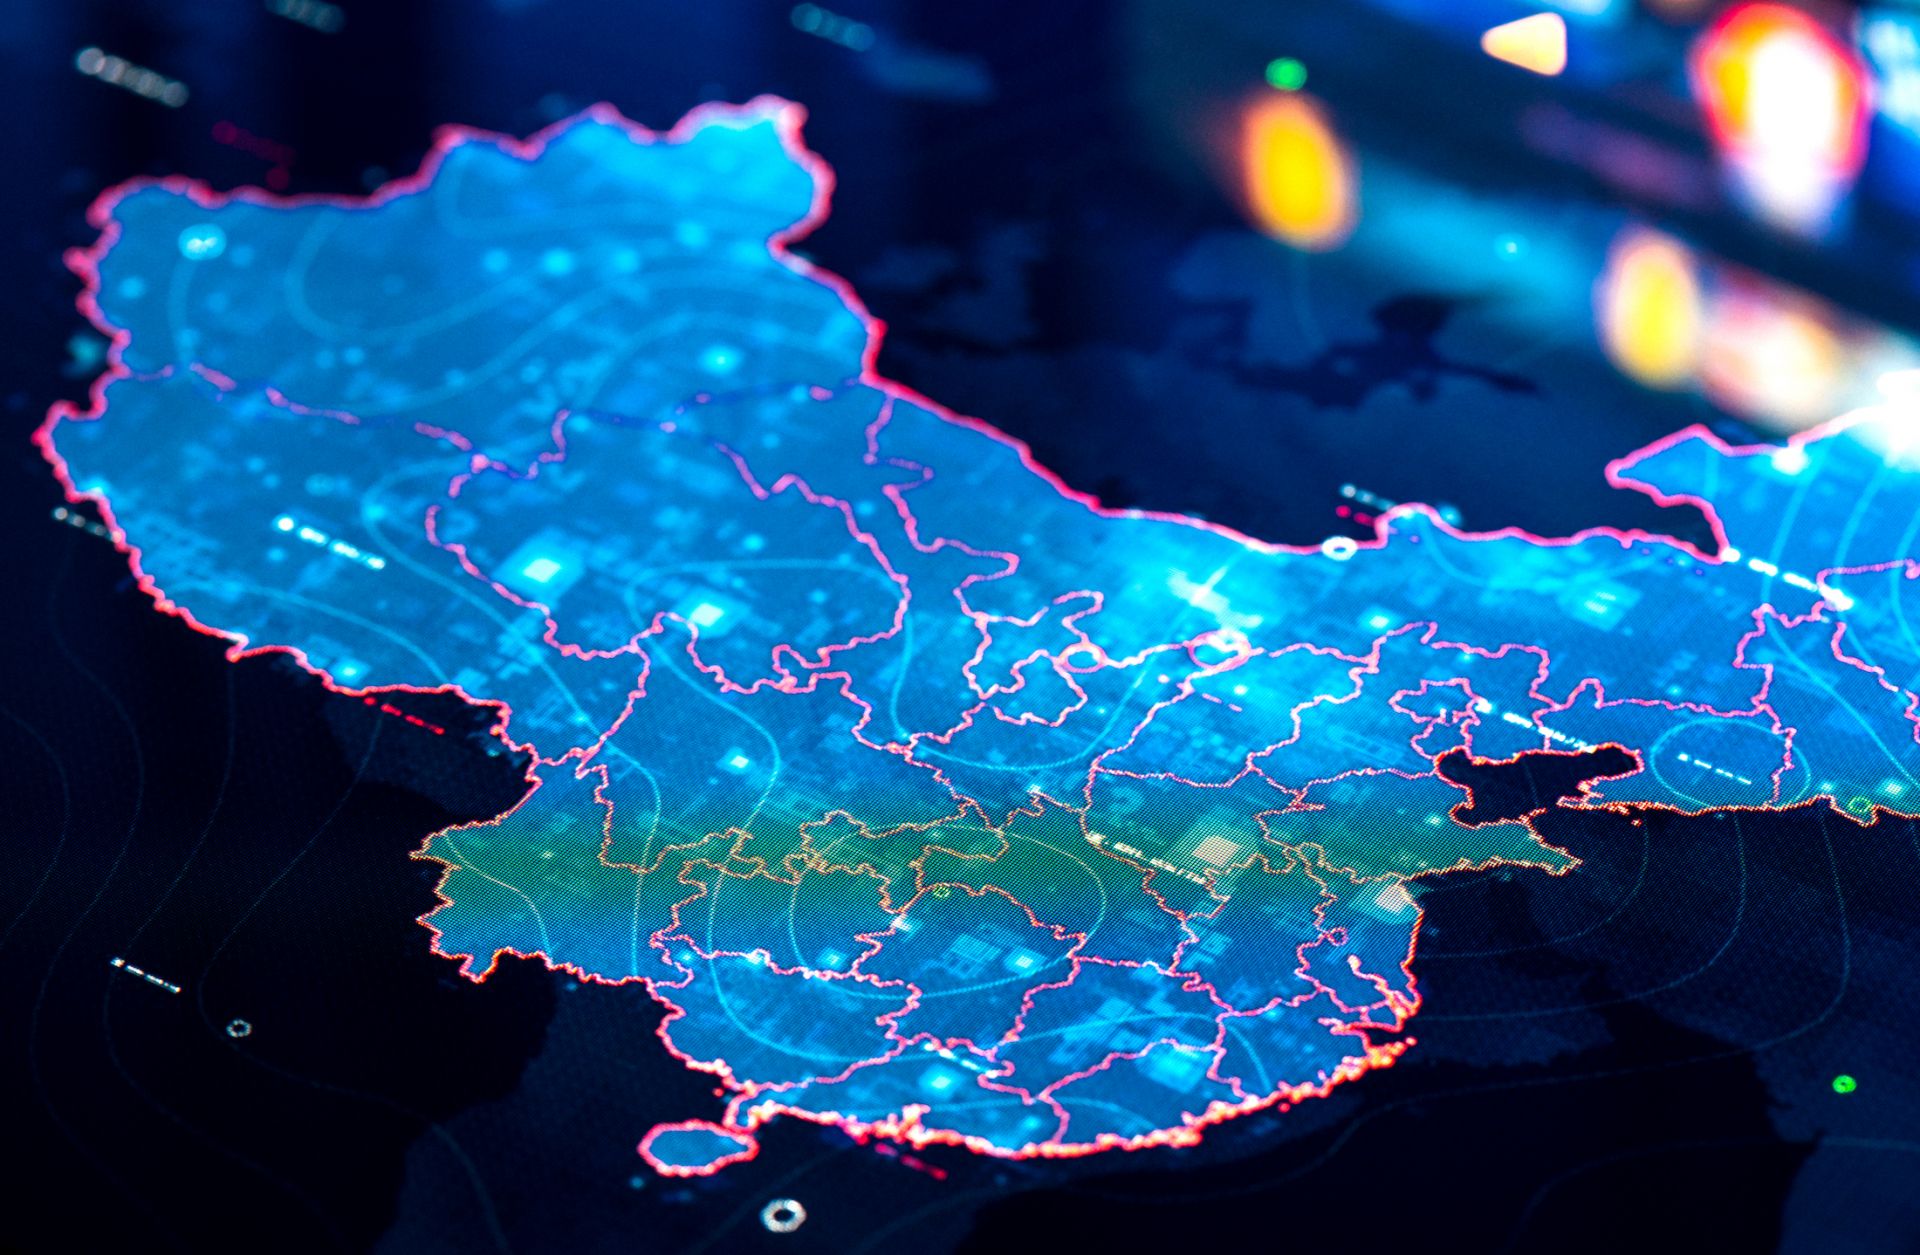 A stock photo shows a map of China on digital display.